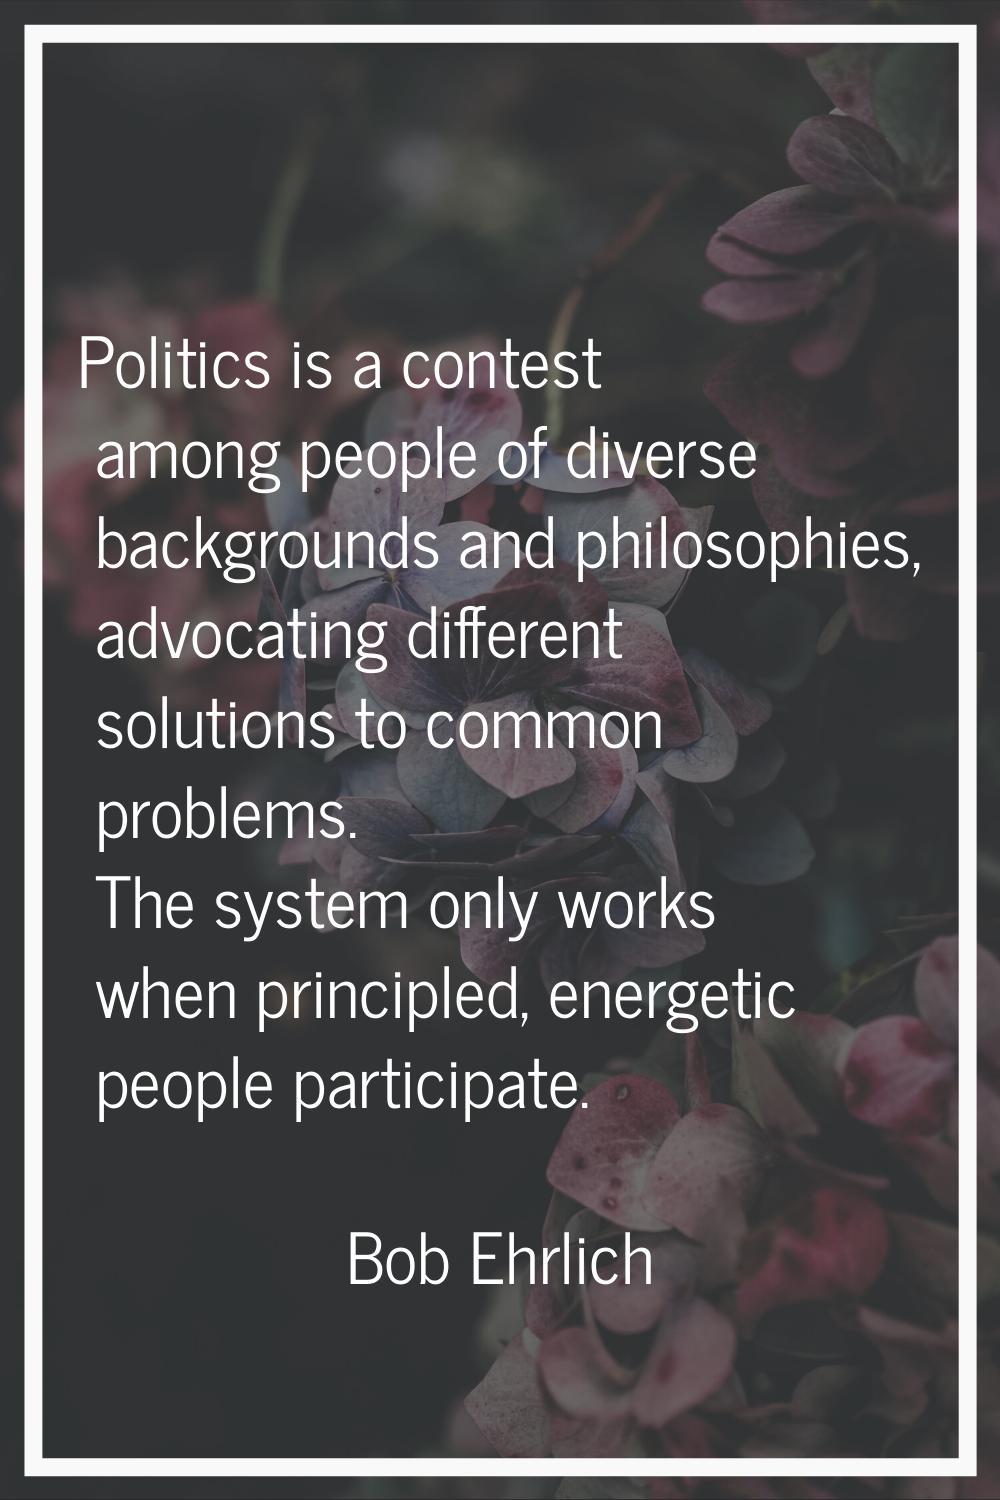 Politics is a contest among people of diverse backgrounds and philosophies, advocating different so